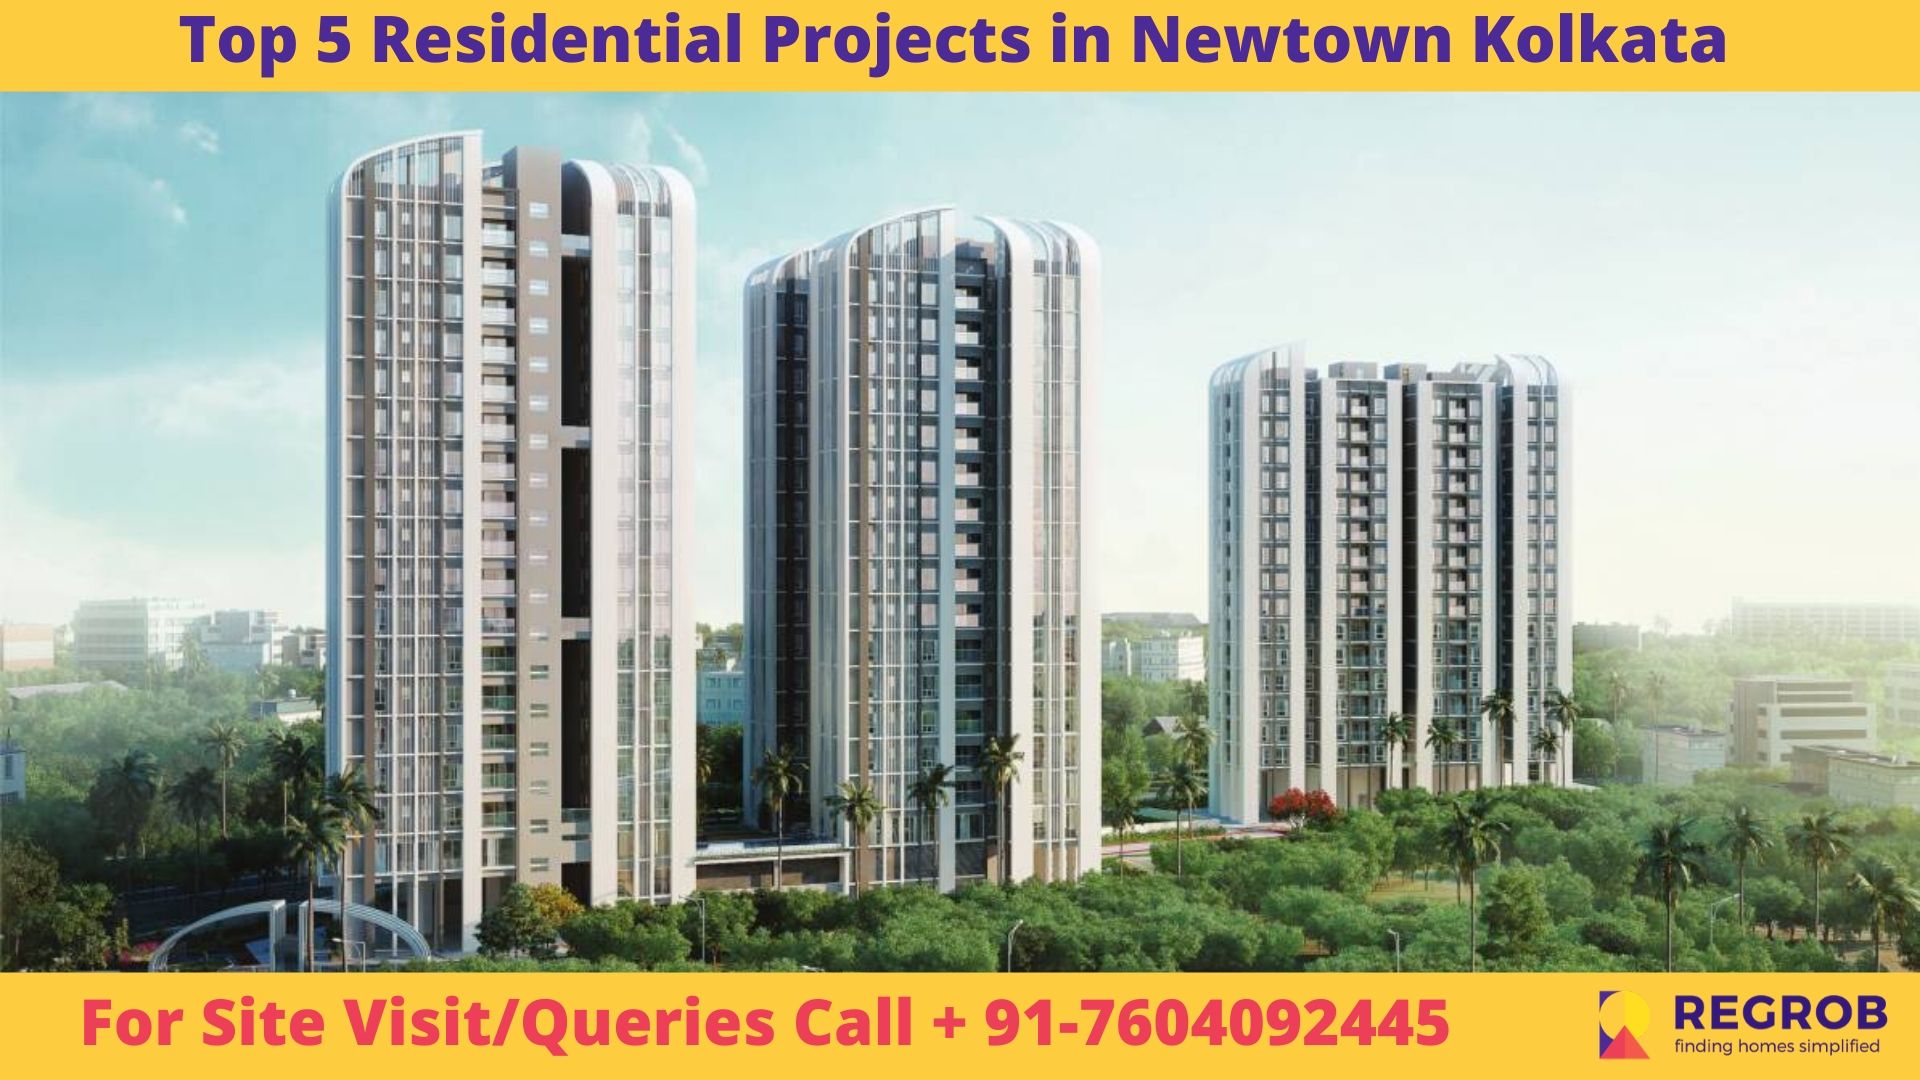 Top 5 Residential Projects in Newtown Kolkata